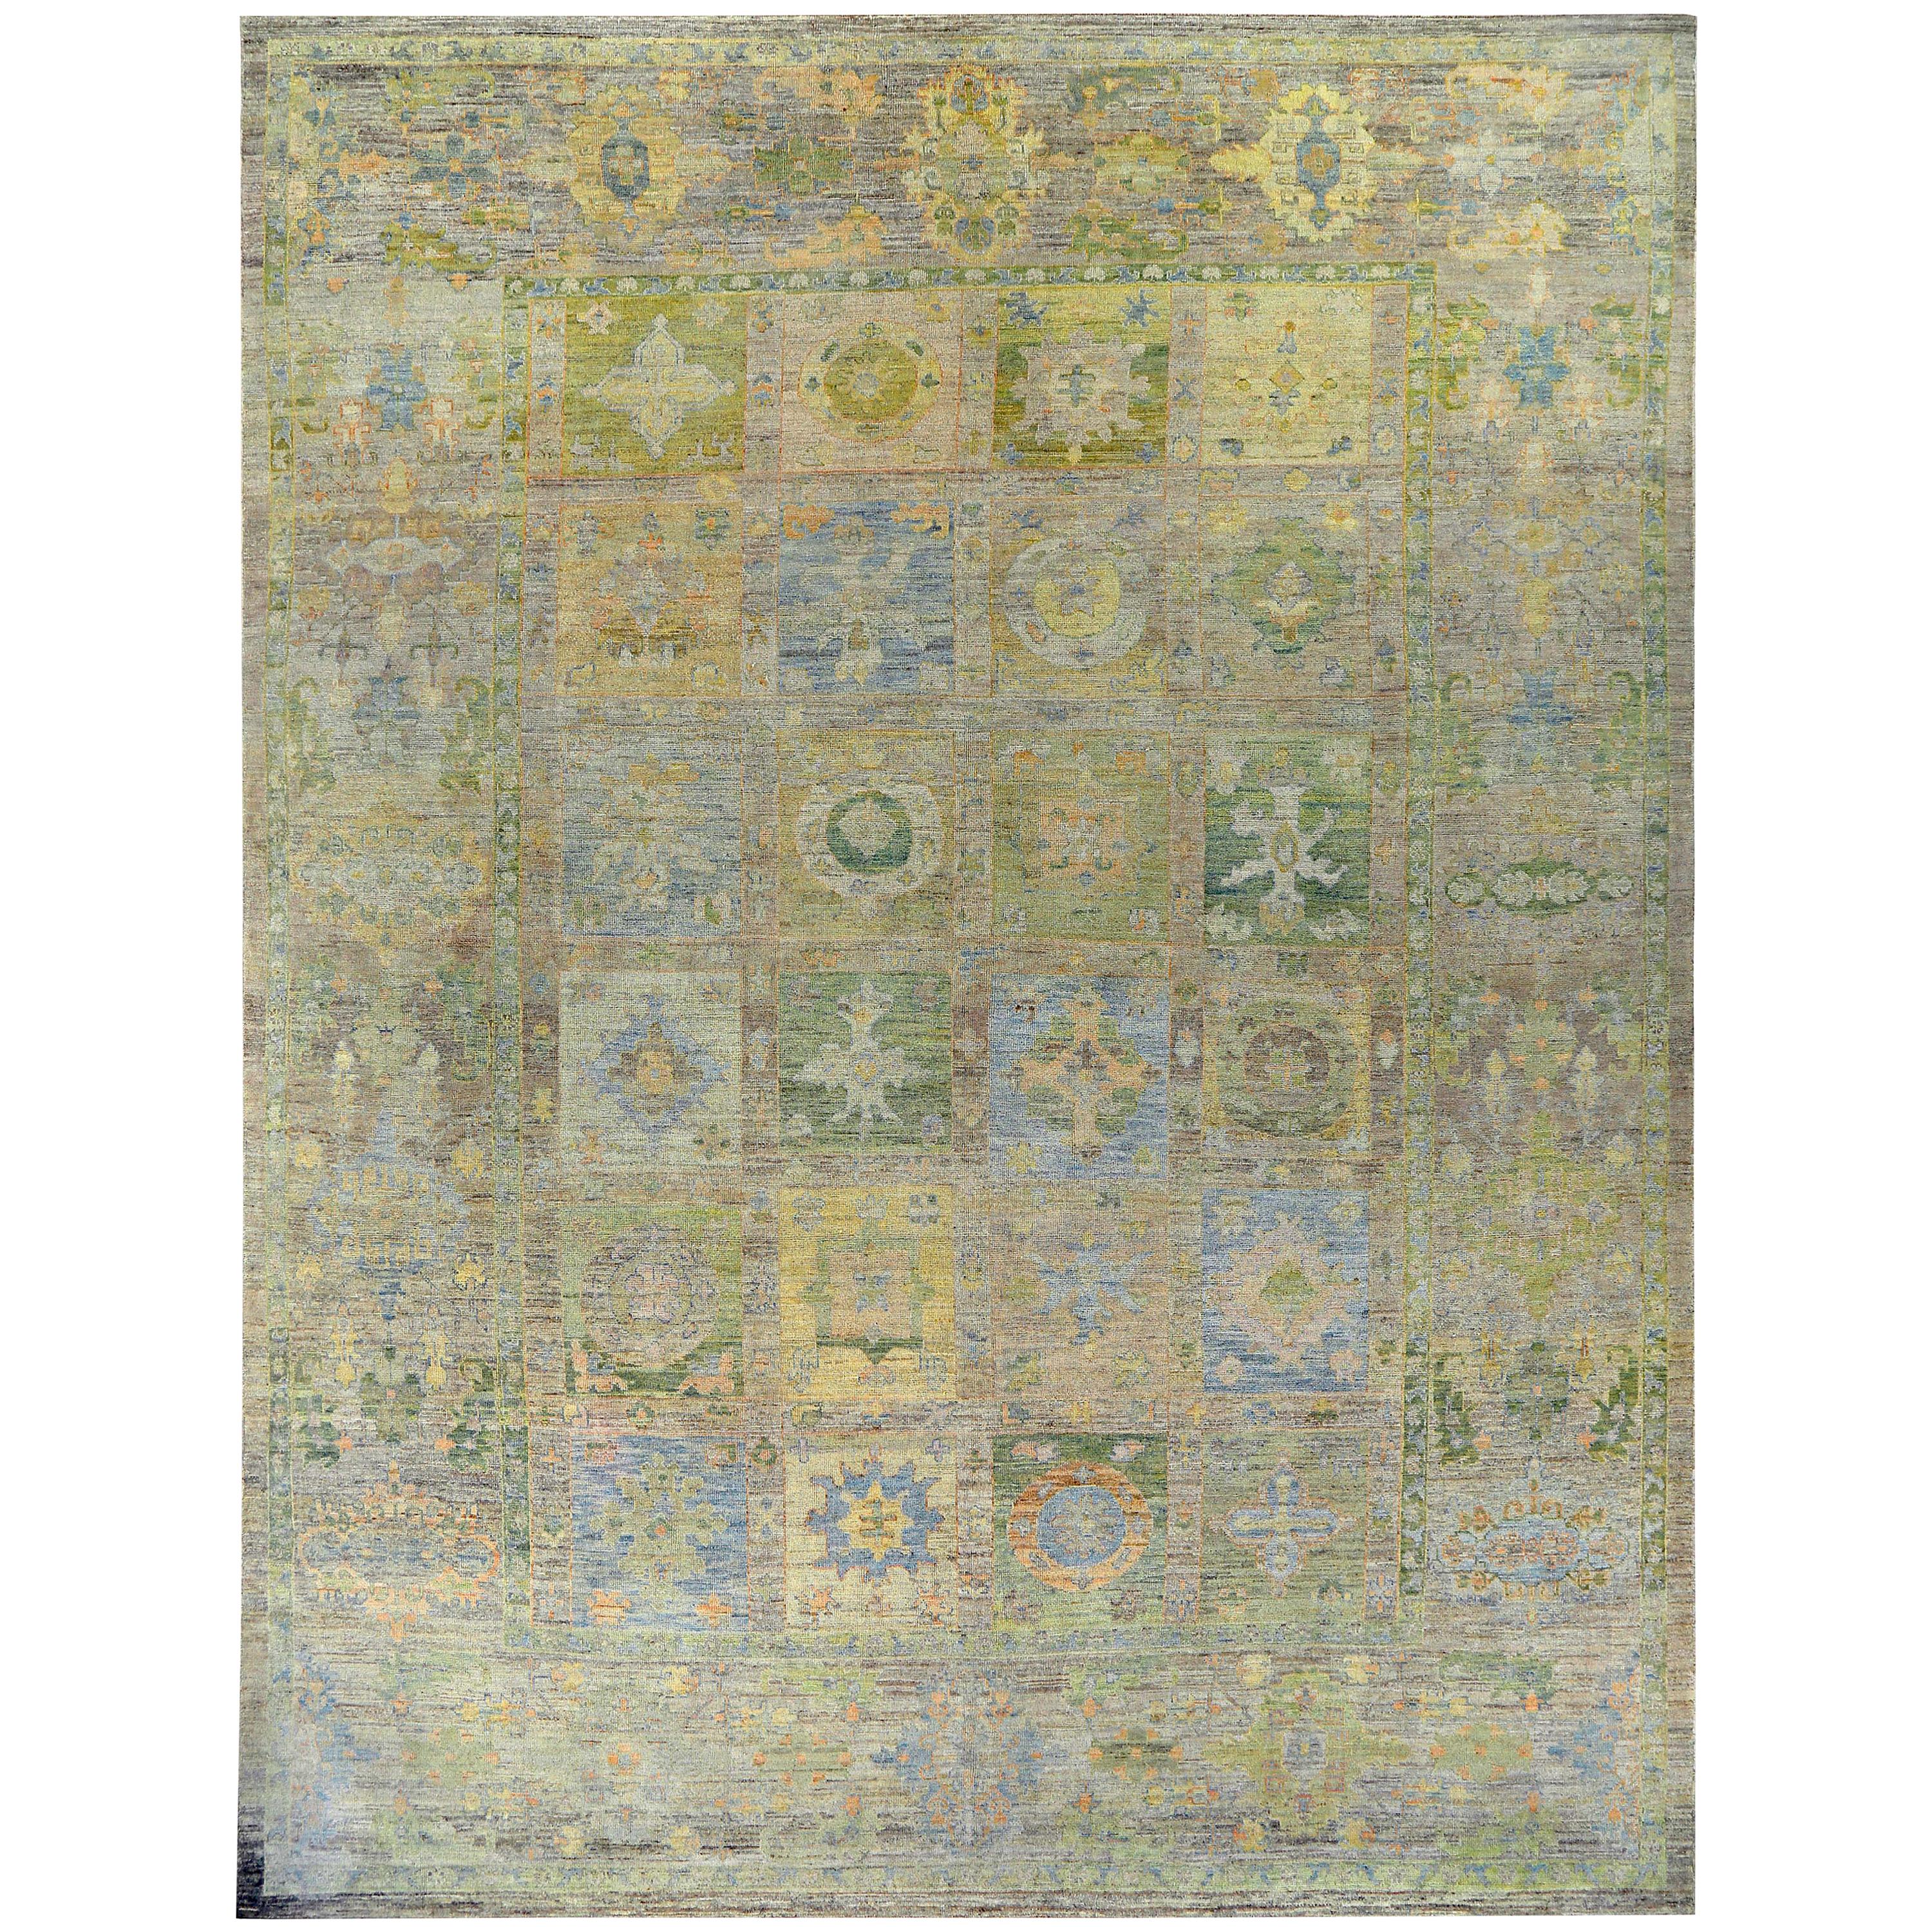 New Turkish Oushak Runner Rug with Blue and Green Floral Blocks on Brown Field